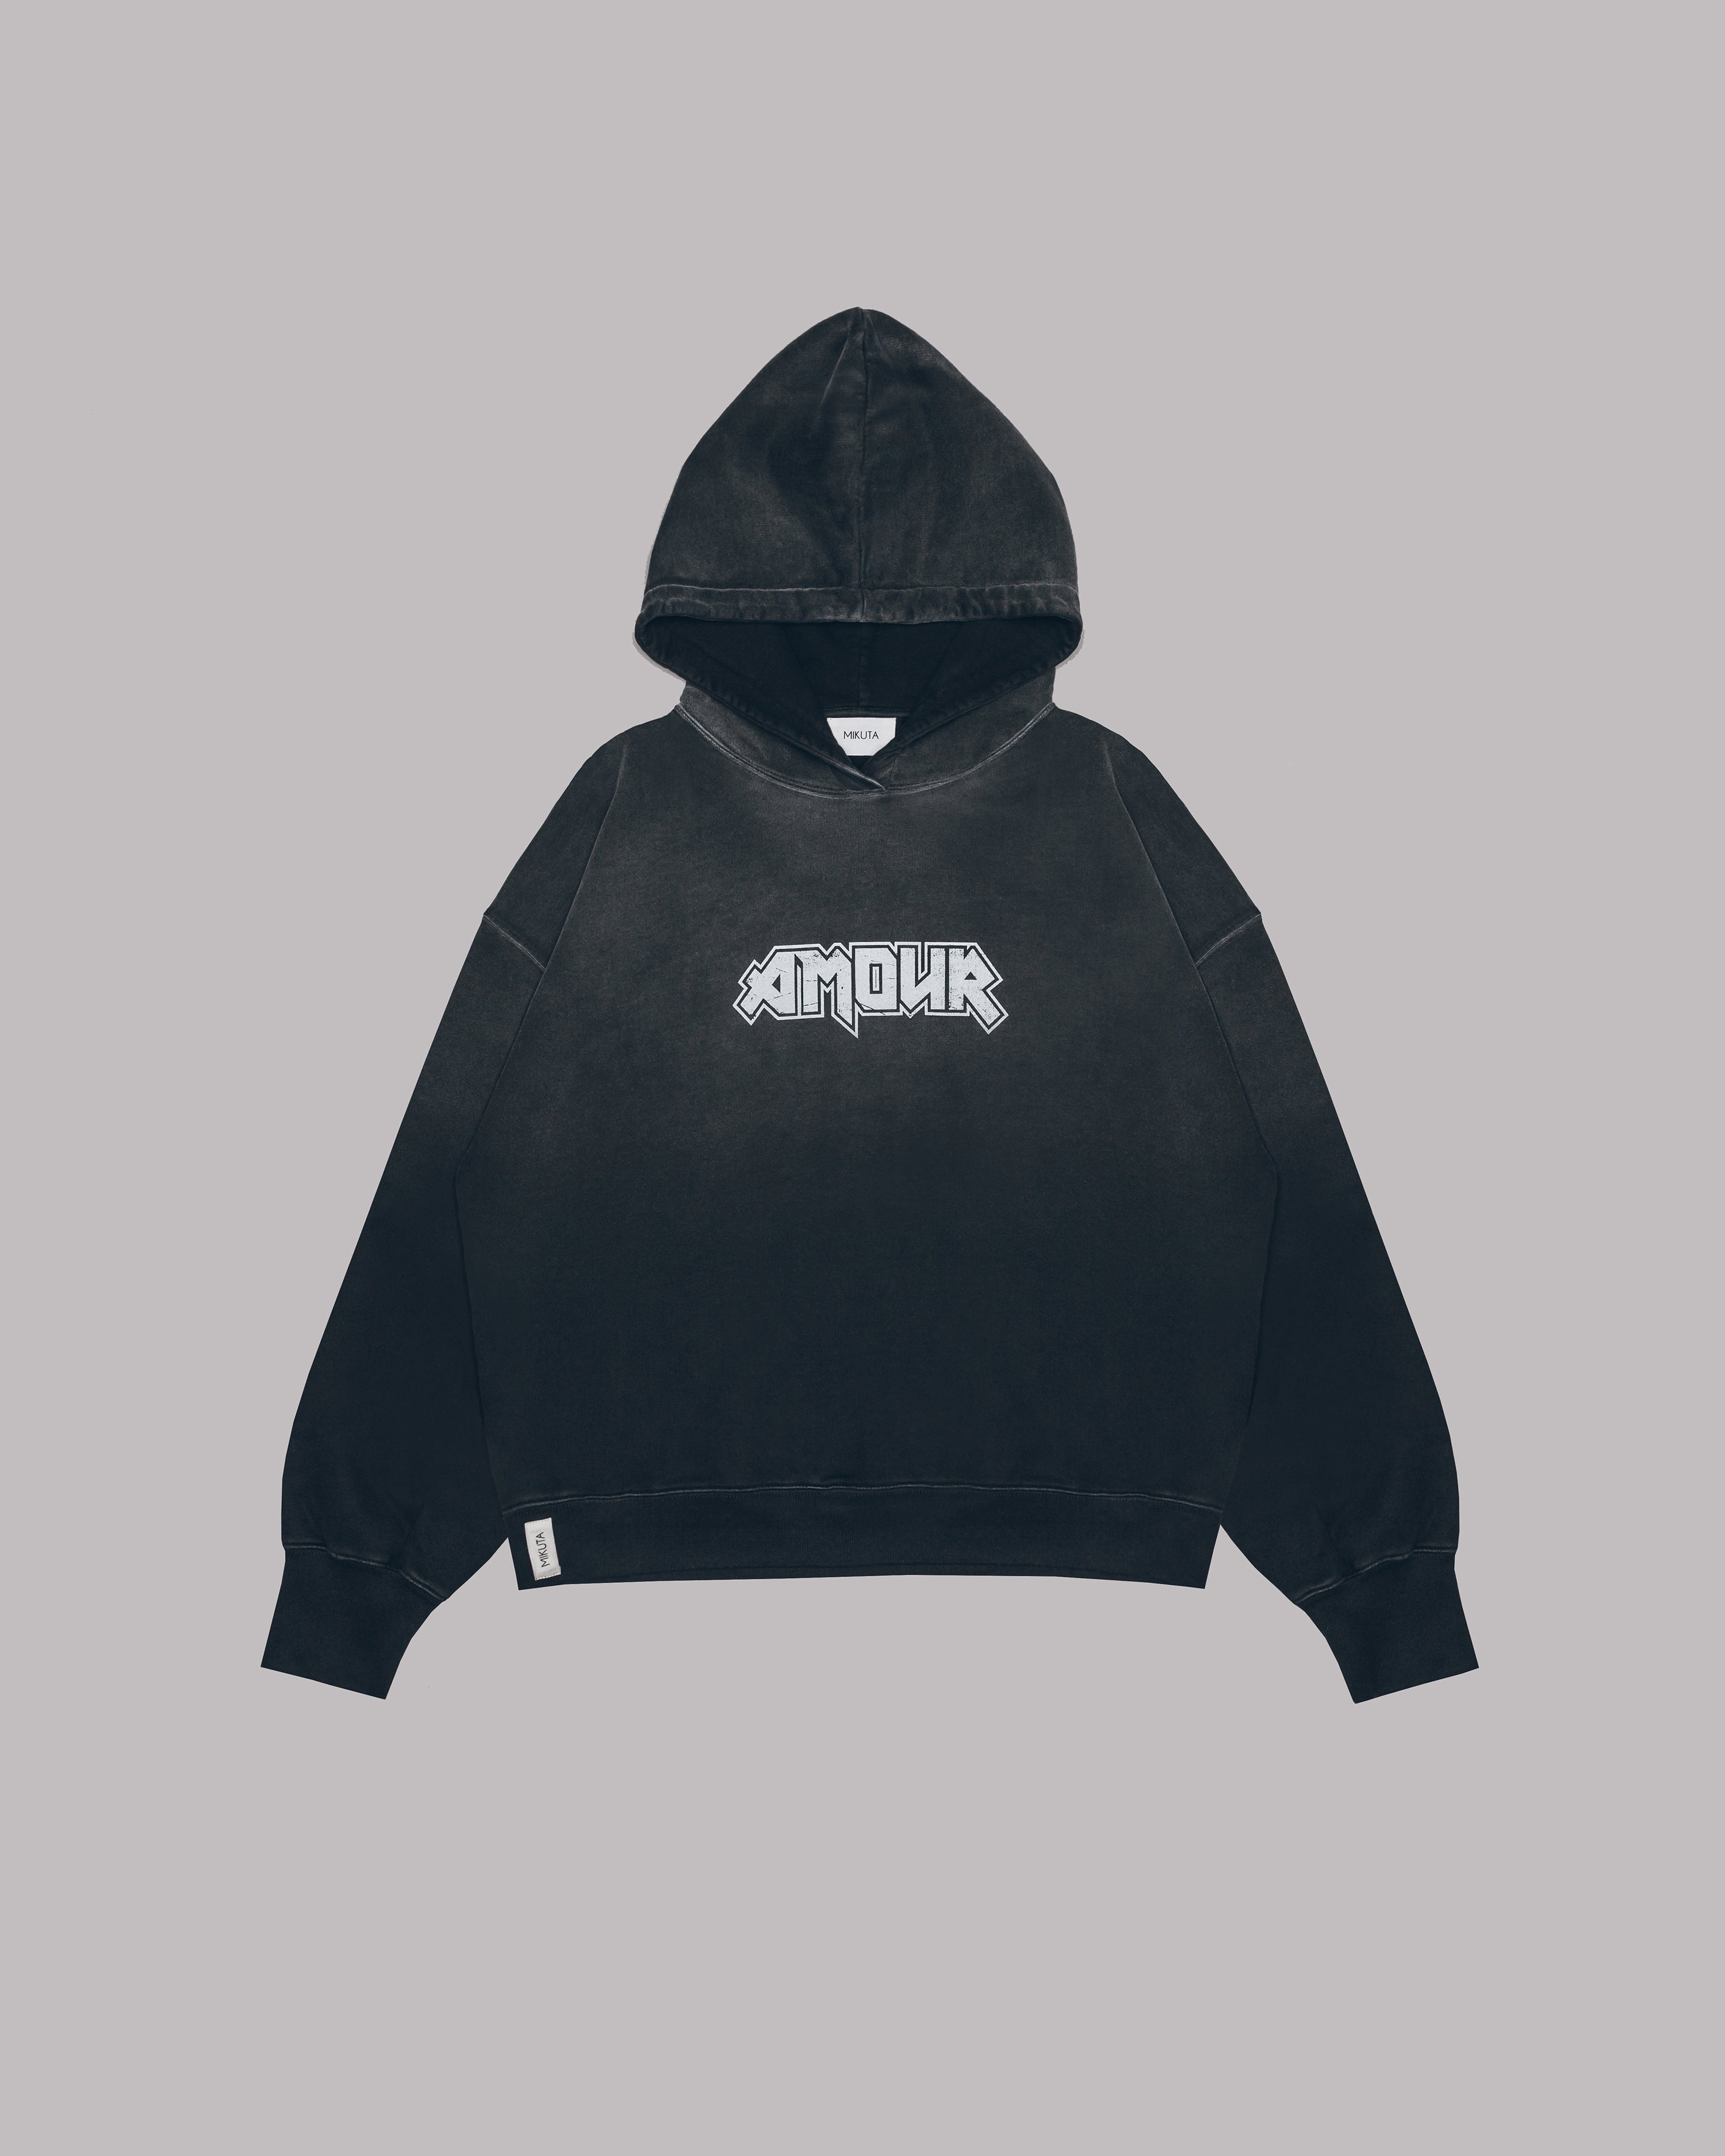 The Dark Cloudy Amour Base Hoodie